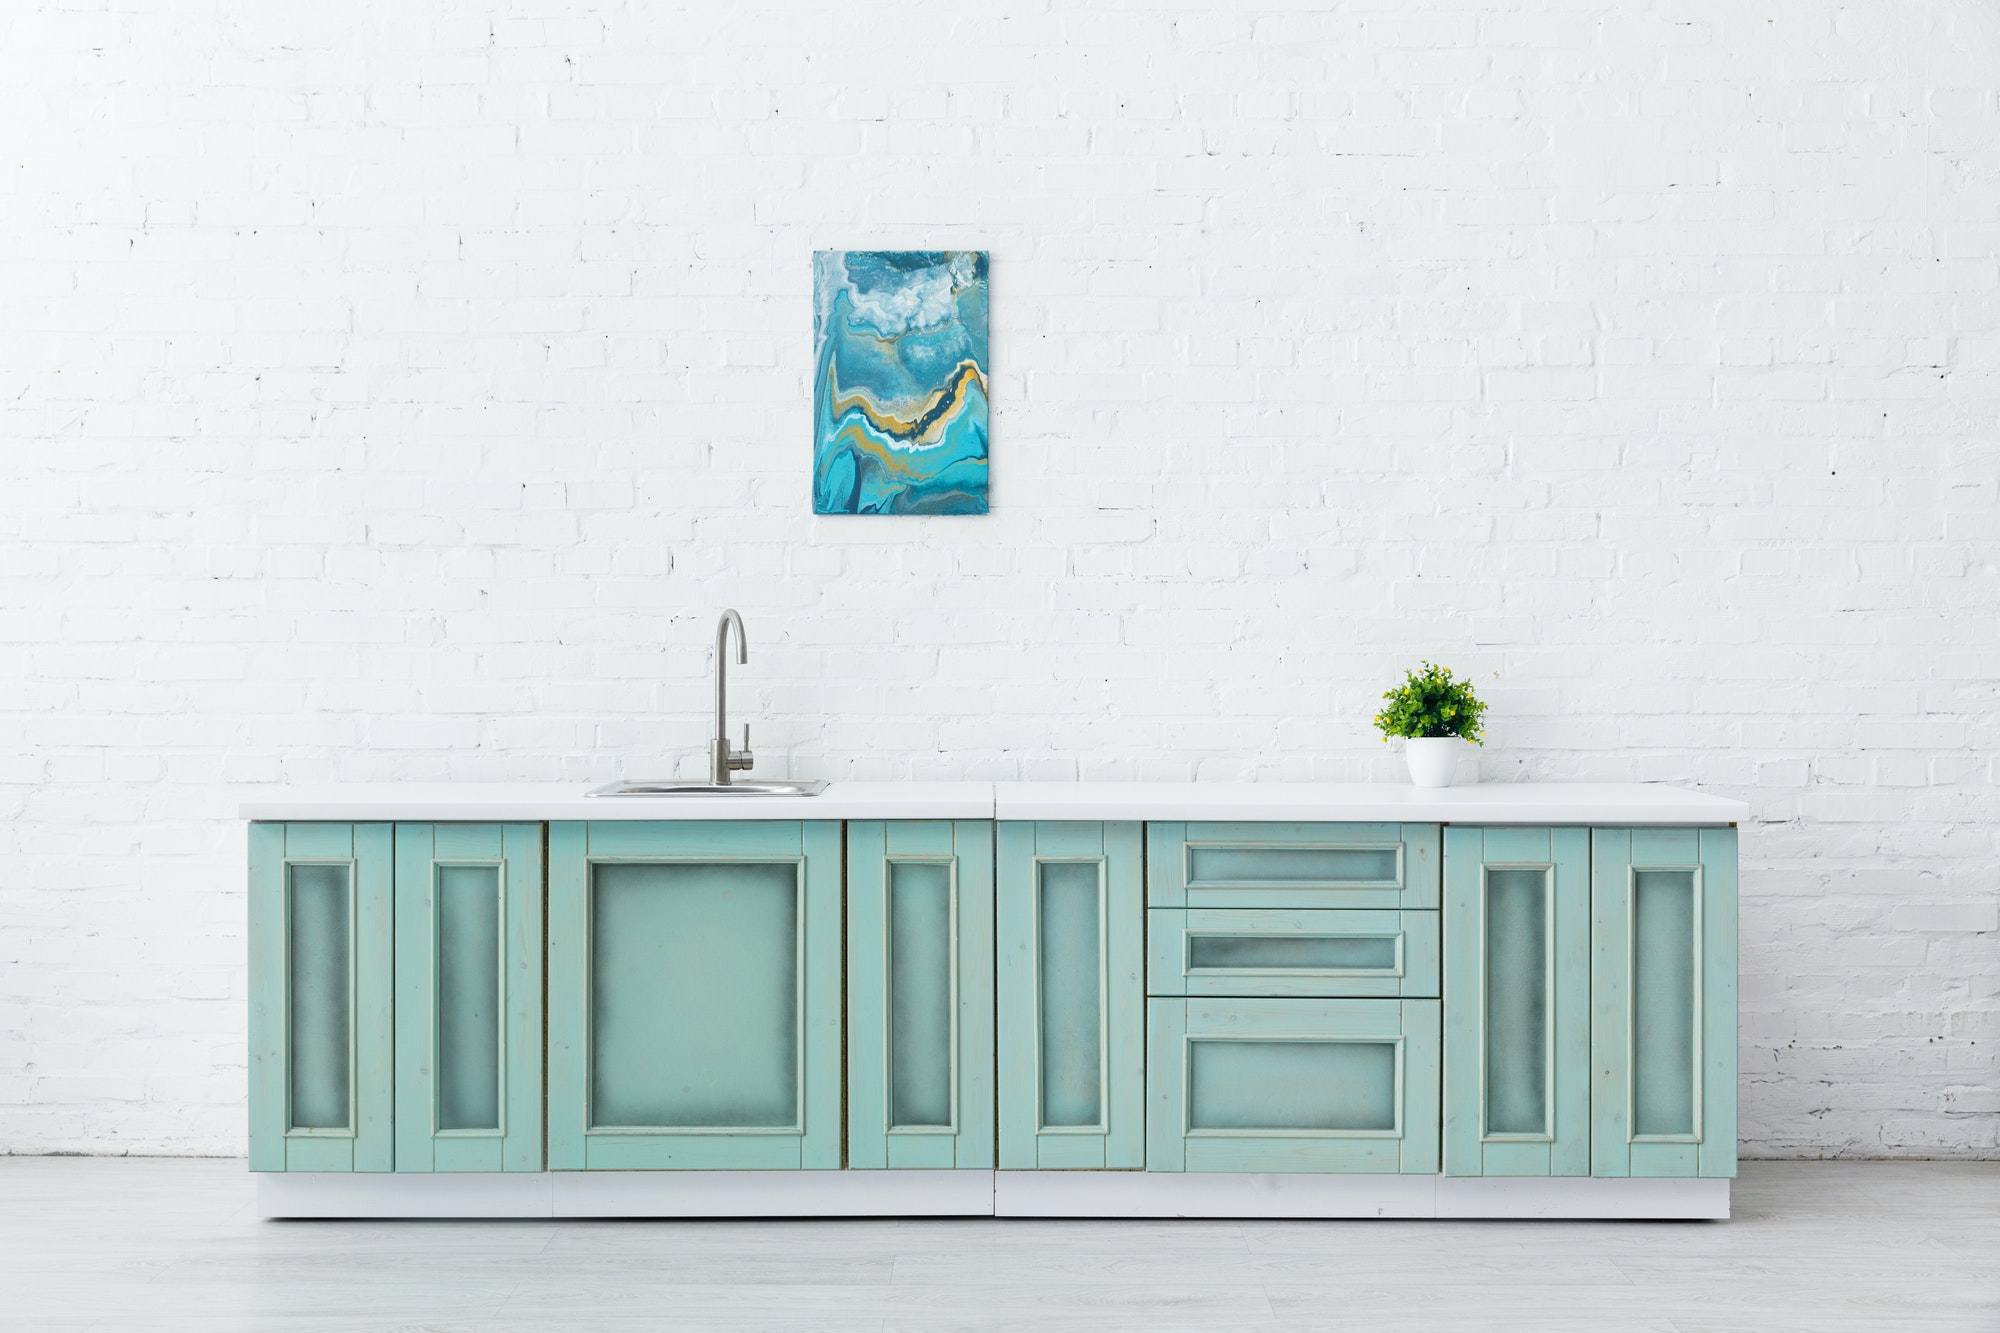 white and turquoise kitchen interior with sink, plant and abstract painting on brick wall